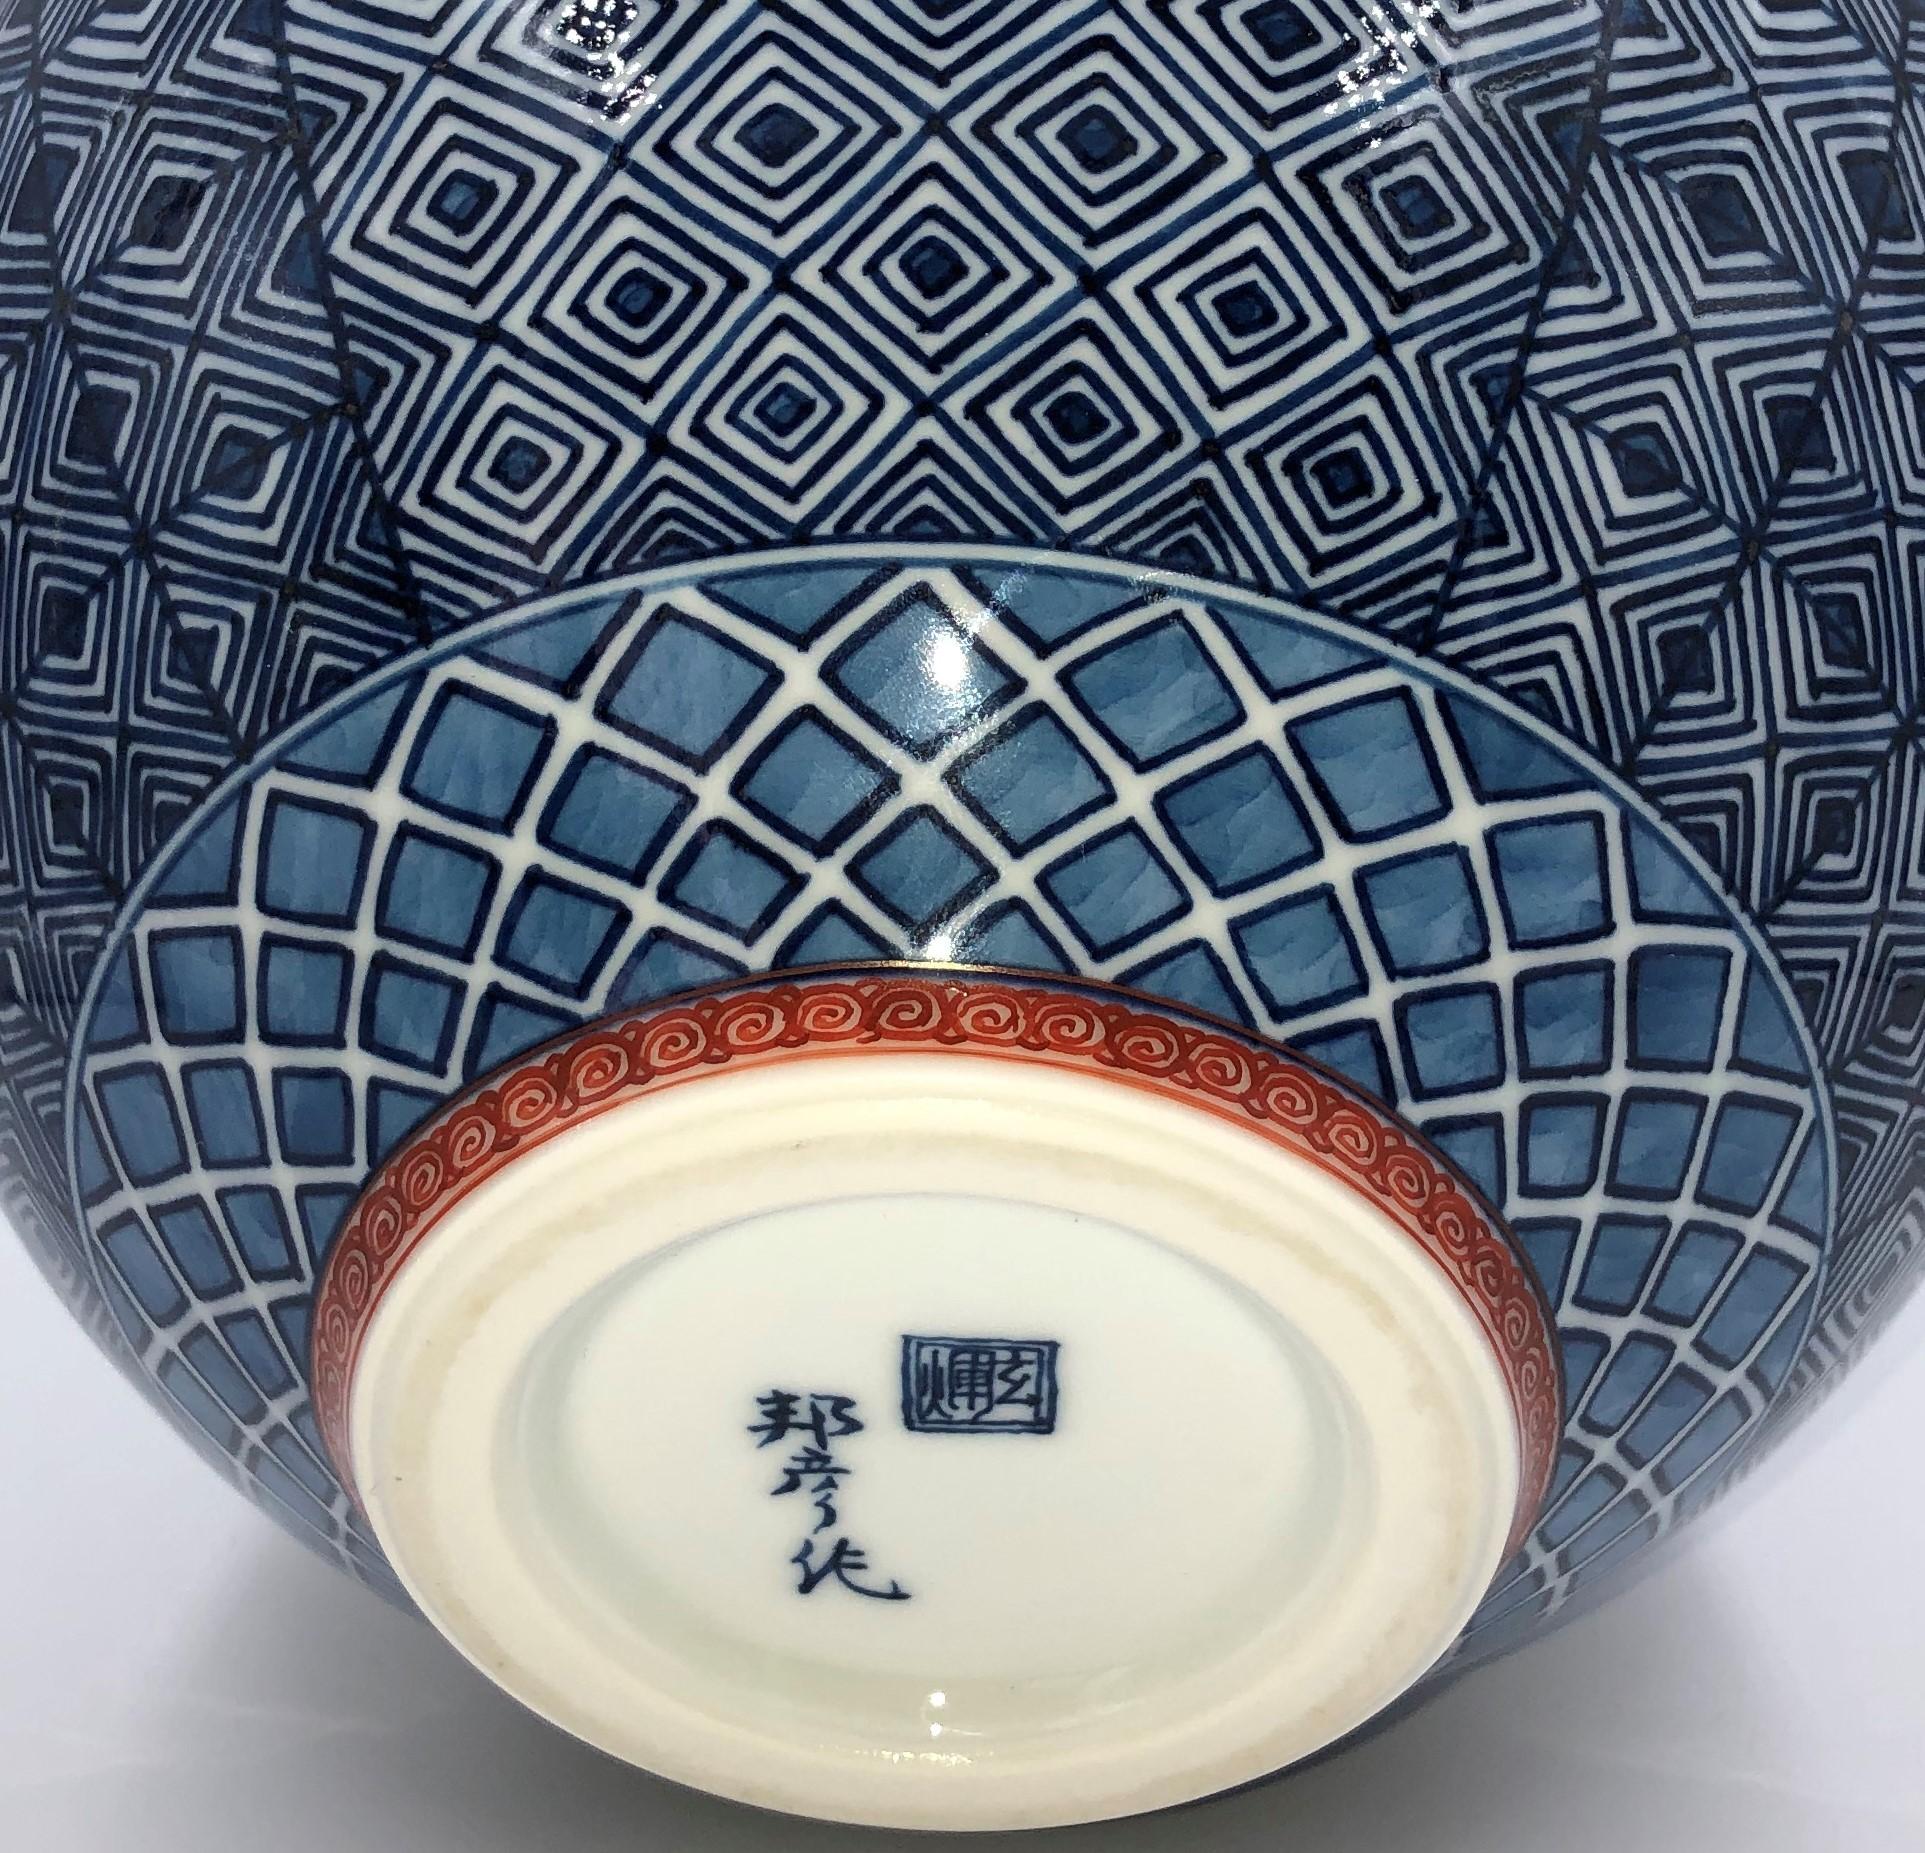 The artist is second-to-none in creating extremely complicated geometric patterns by applying the most sophisticated and demanding techniques of miniature painting to the complex and curved surfaces of porcelain pieces.
This vase showcases two of